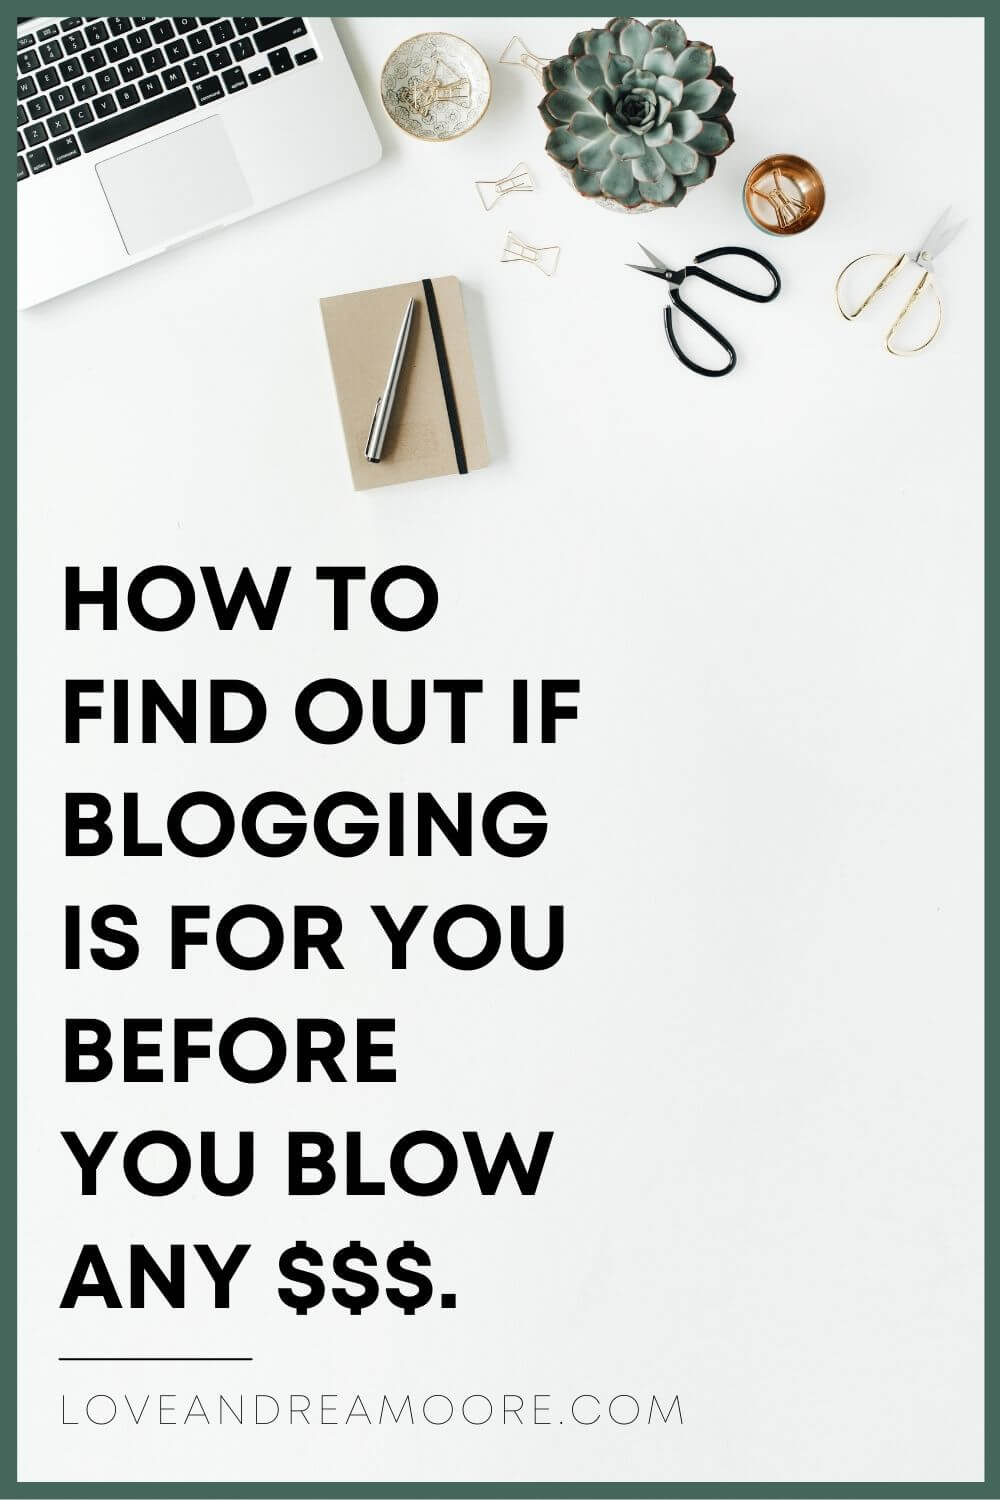 white desk with computer, office supplies, and plant at top with text below that says: "How to find out if blogging is for you before you blow any $$$."